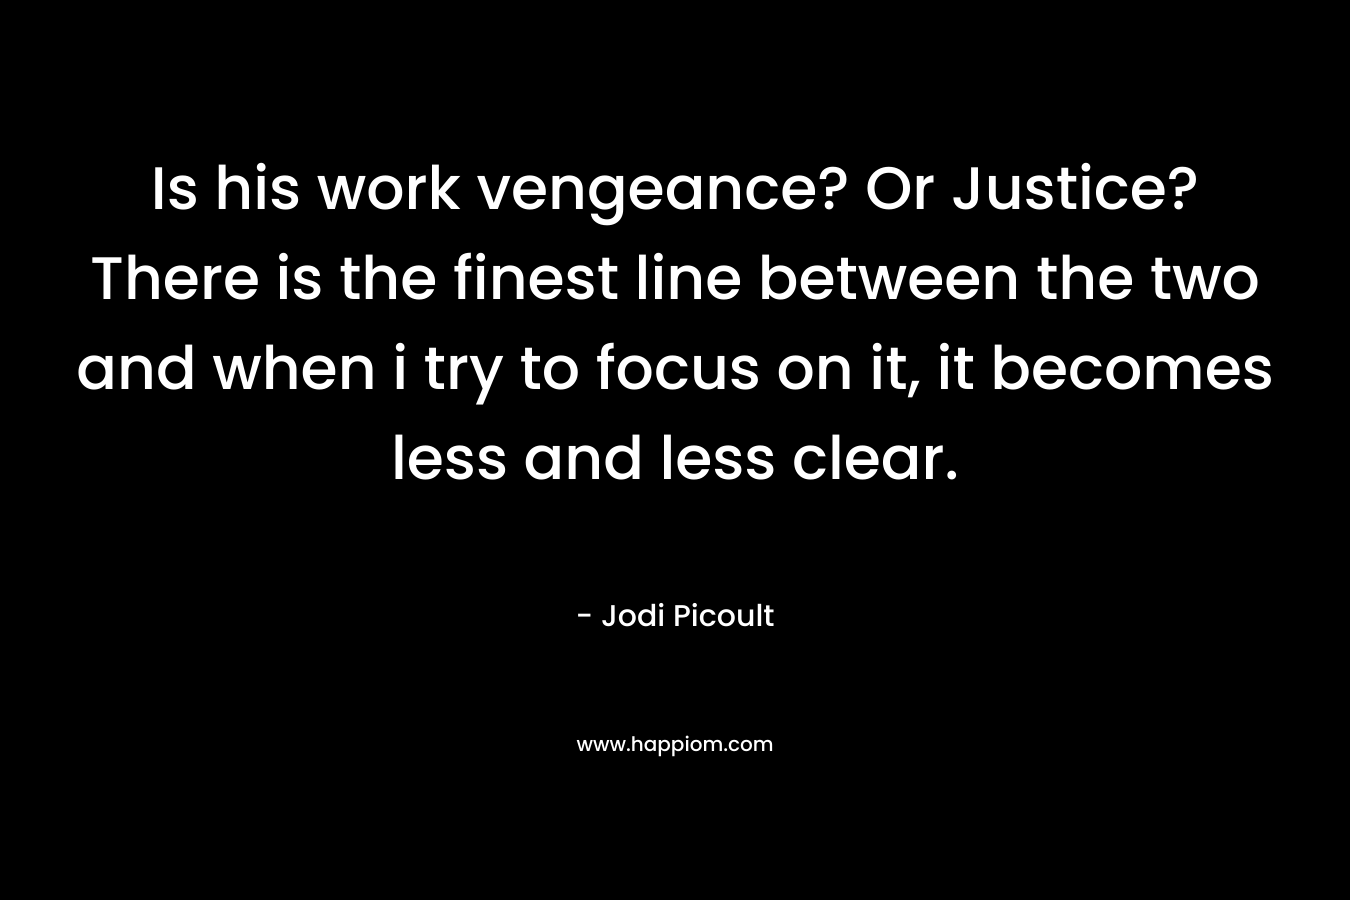 Is his work vengeance? Or Justice? There is the finest line between the two and when i try to focus on it, it becomes less and less clear. – Jodi Picoult